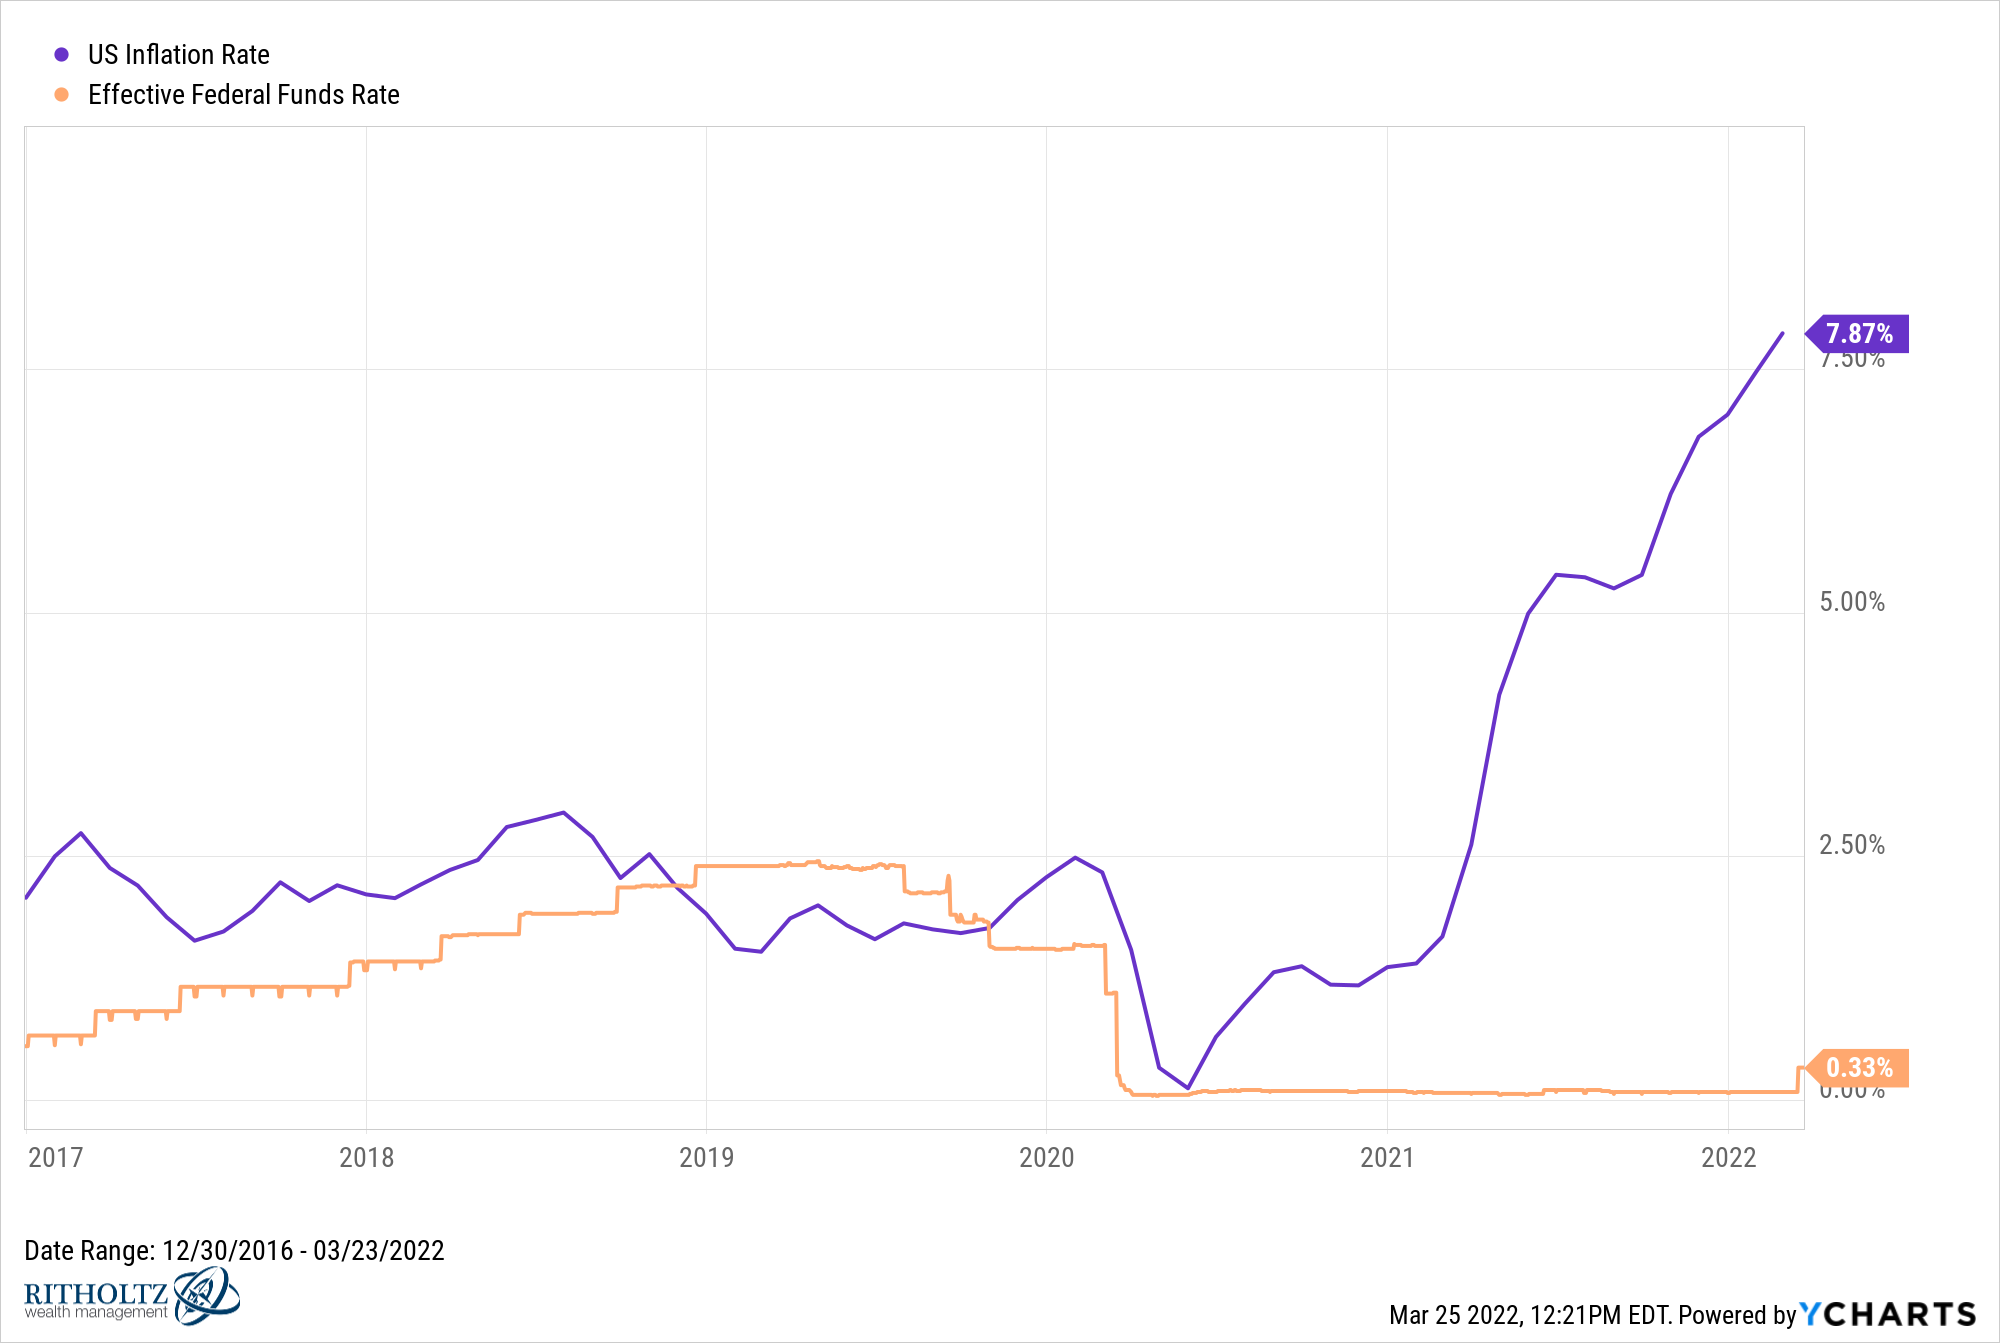 US Inflation Rate compared to Effective Federal Funds Rate since 2017